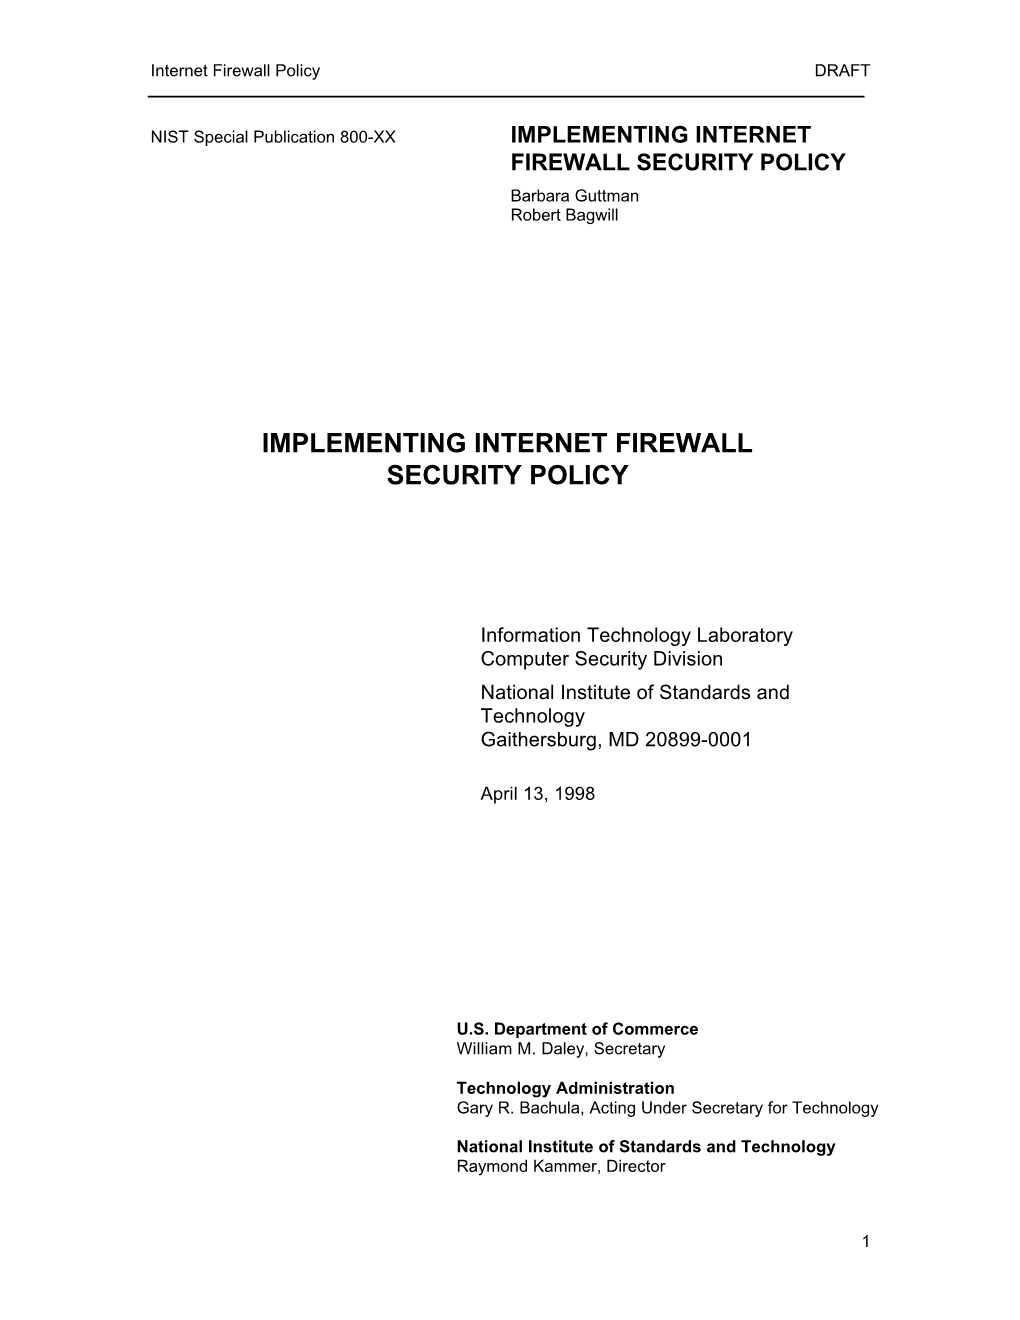 NIST: Implementing Internet Firewall Security Policy